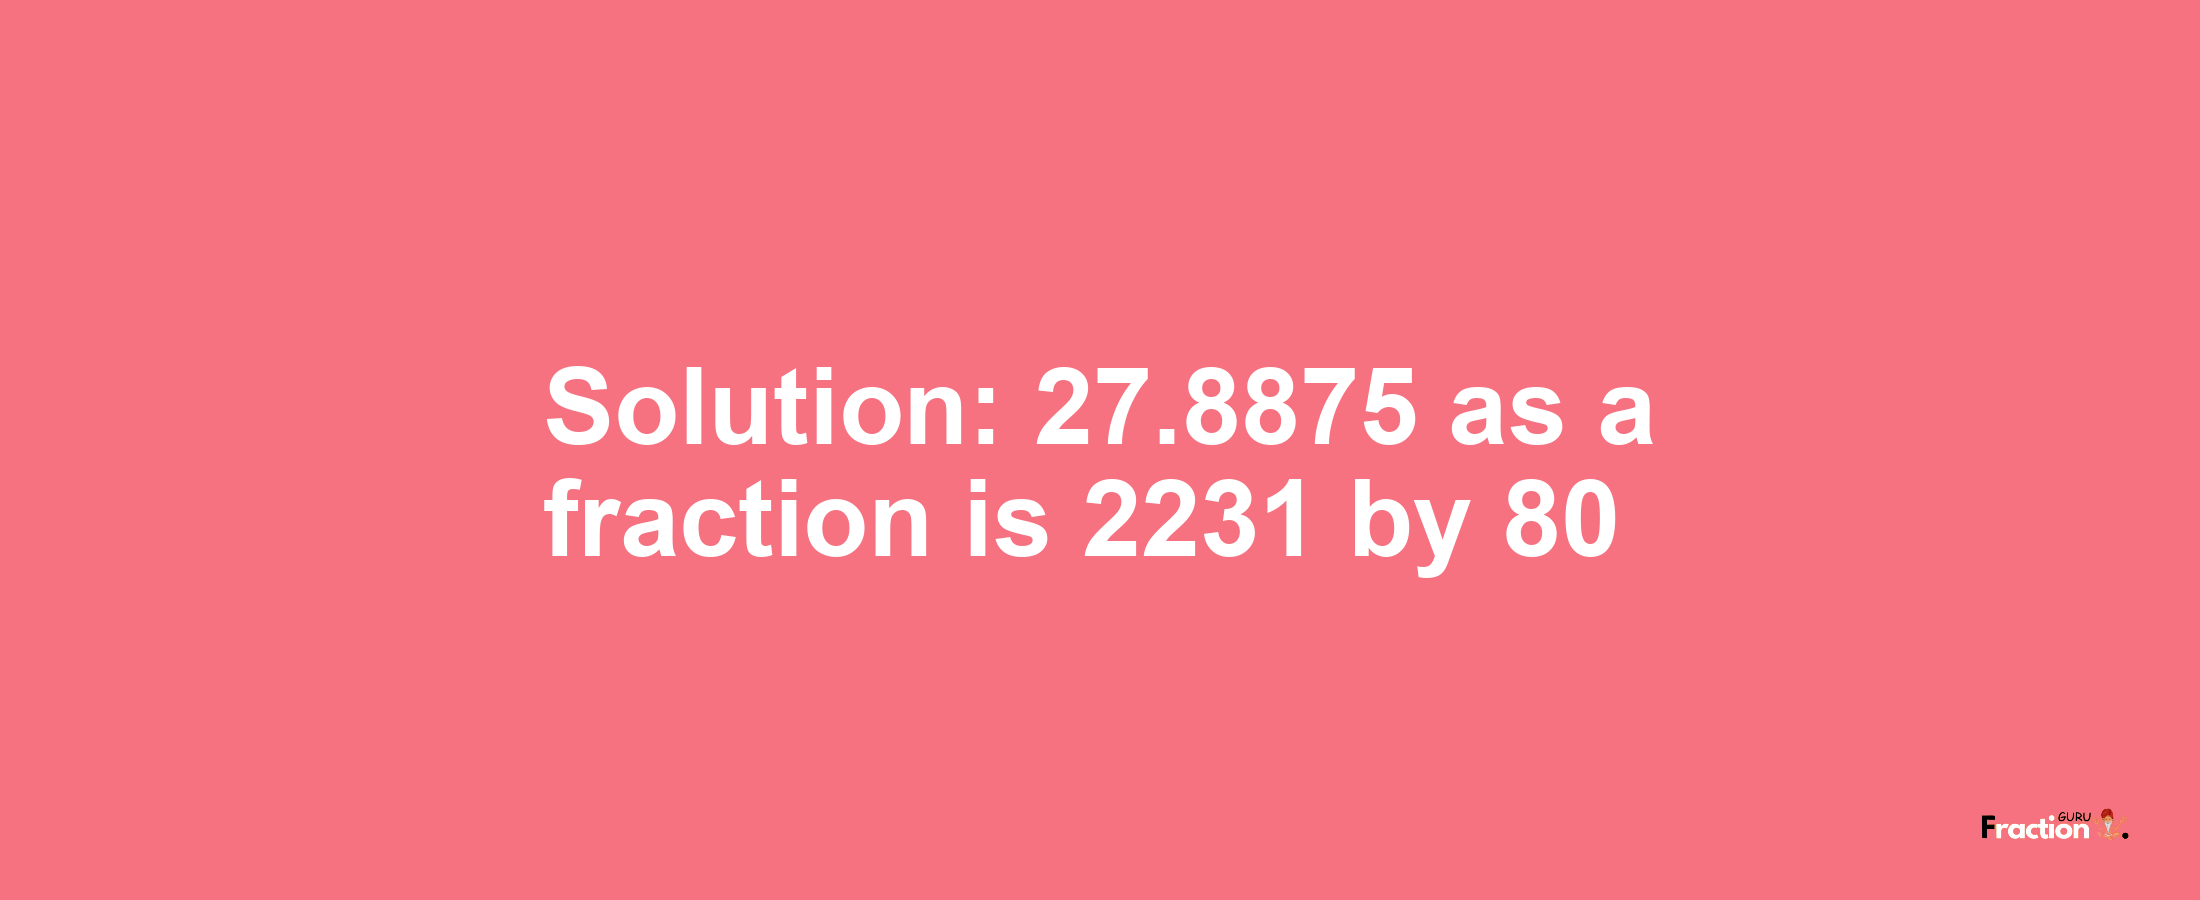 Solution:27.8875 as a fraction is 2231/80